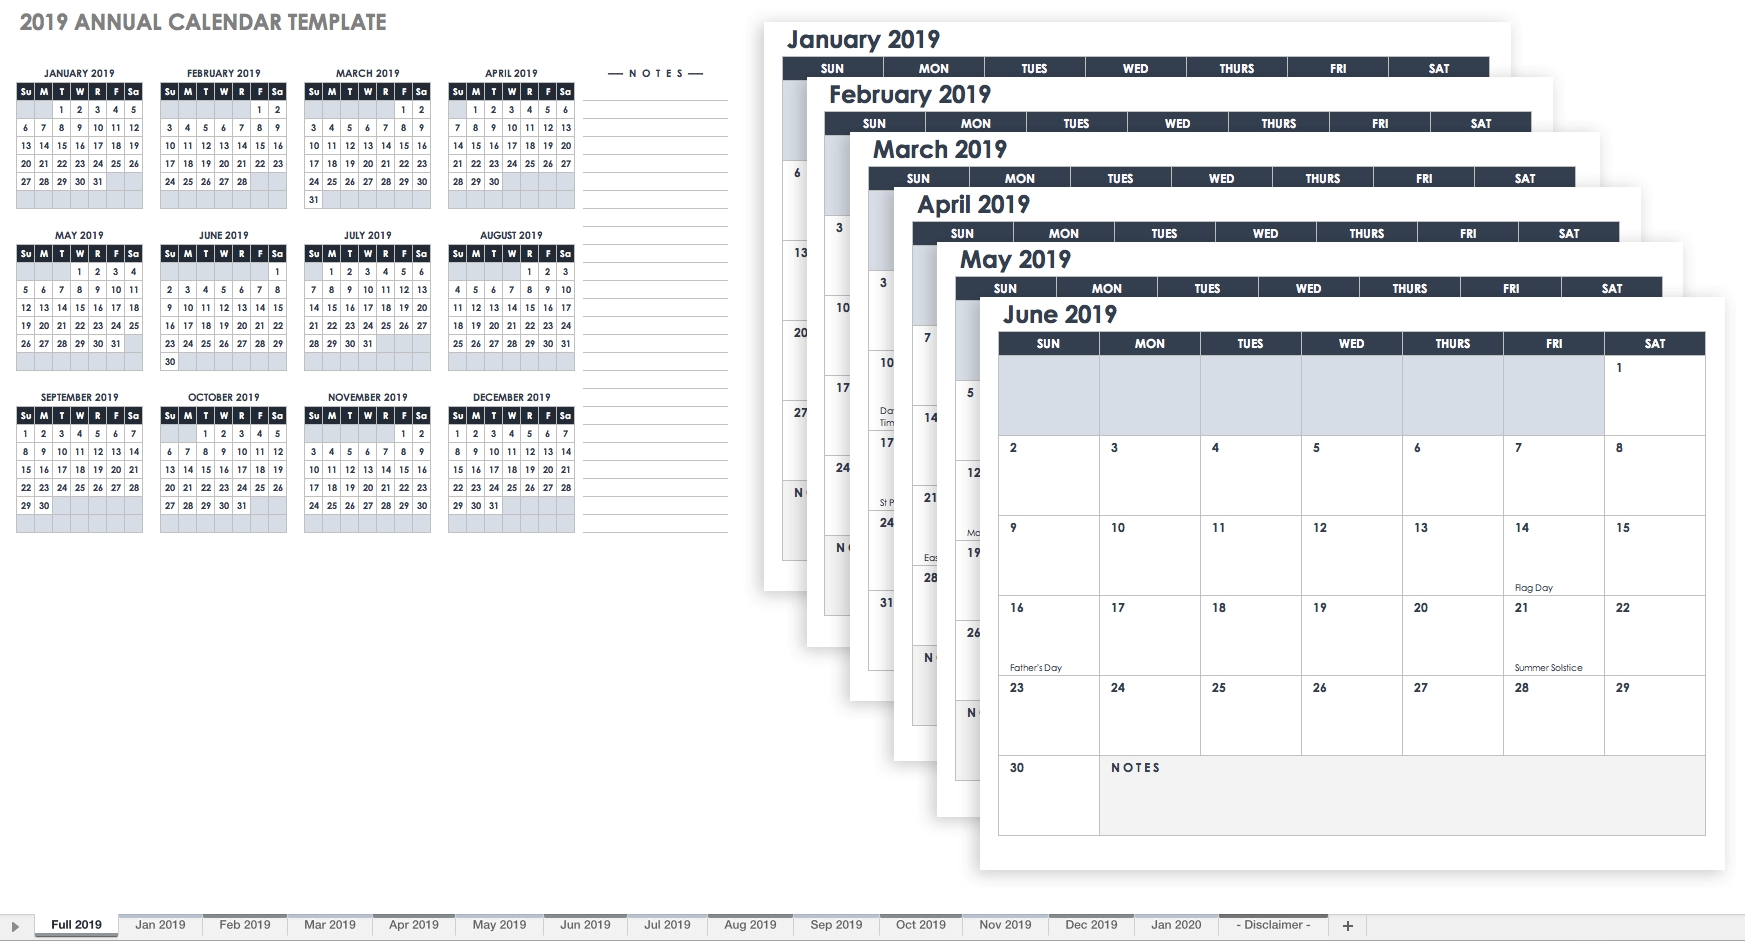 15 Free Monthly Calendar Templates | Smartsheet regarding Sample Monthly Calendars To Printable With Notes